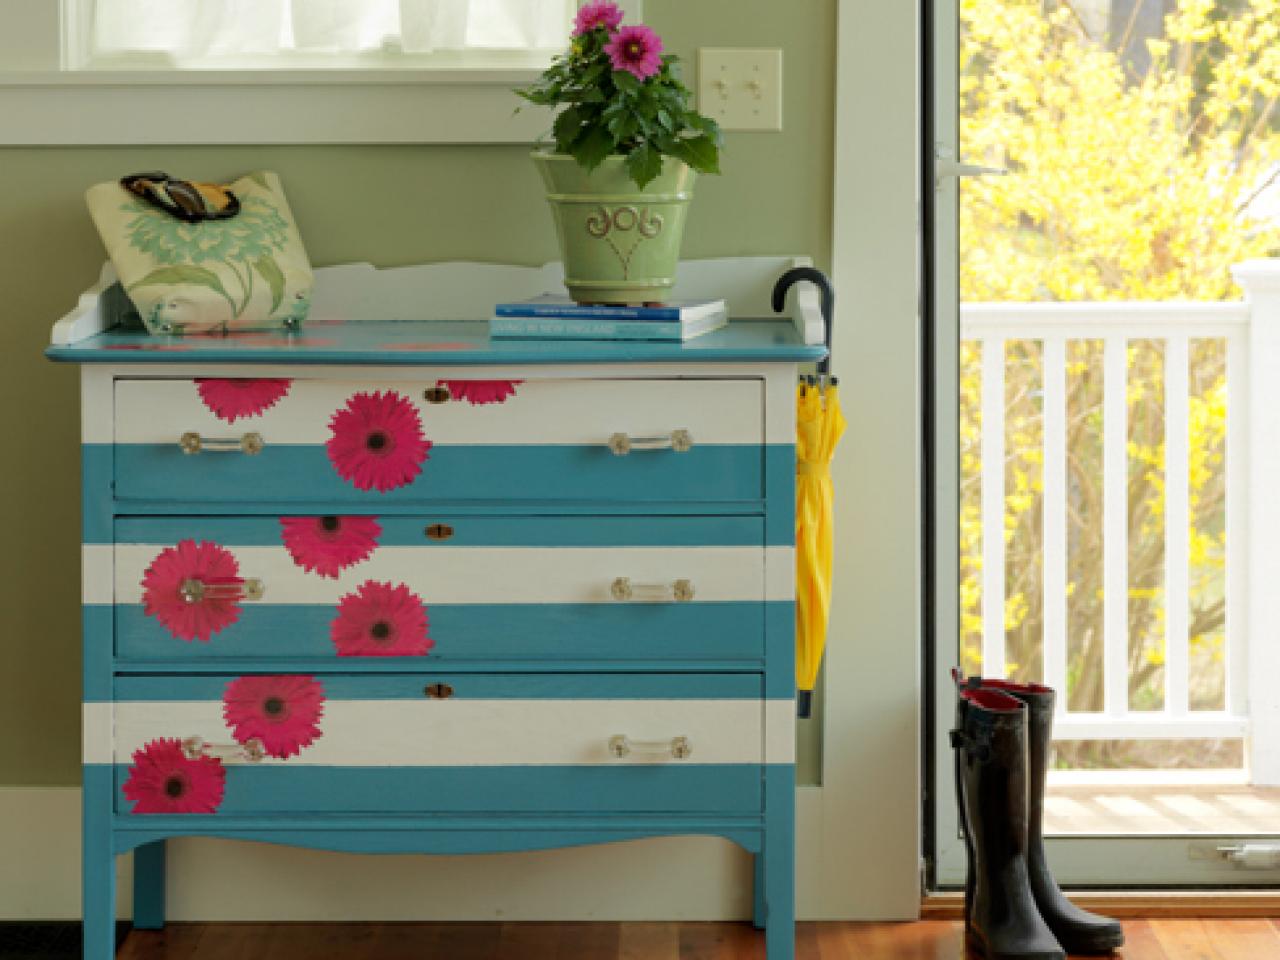 Painted stripes and bright flower stickers